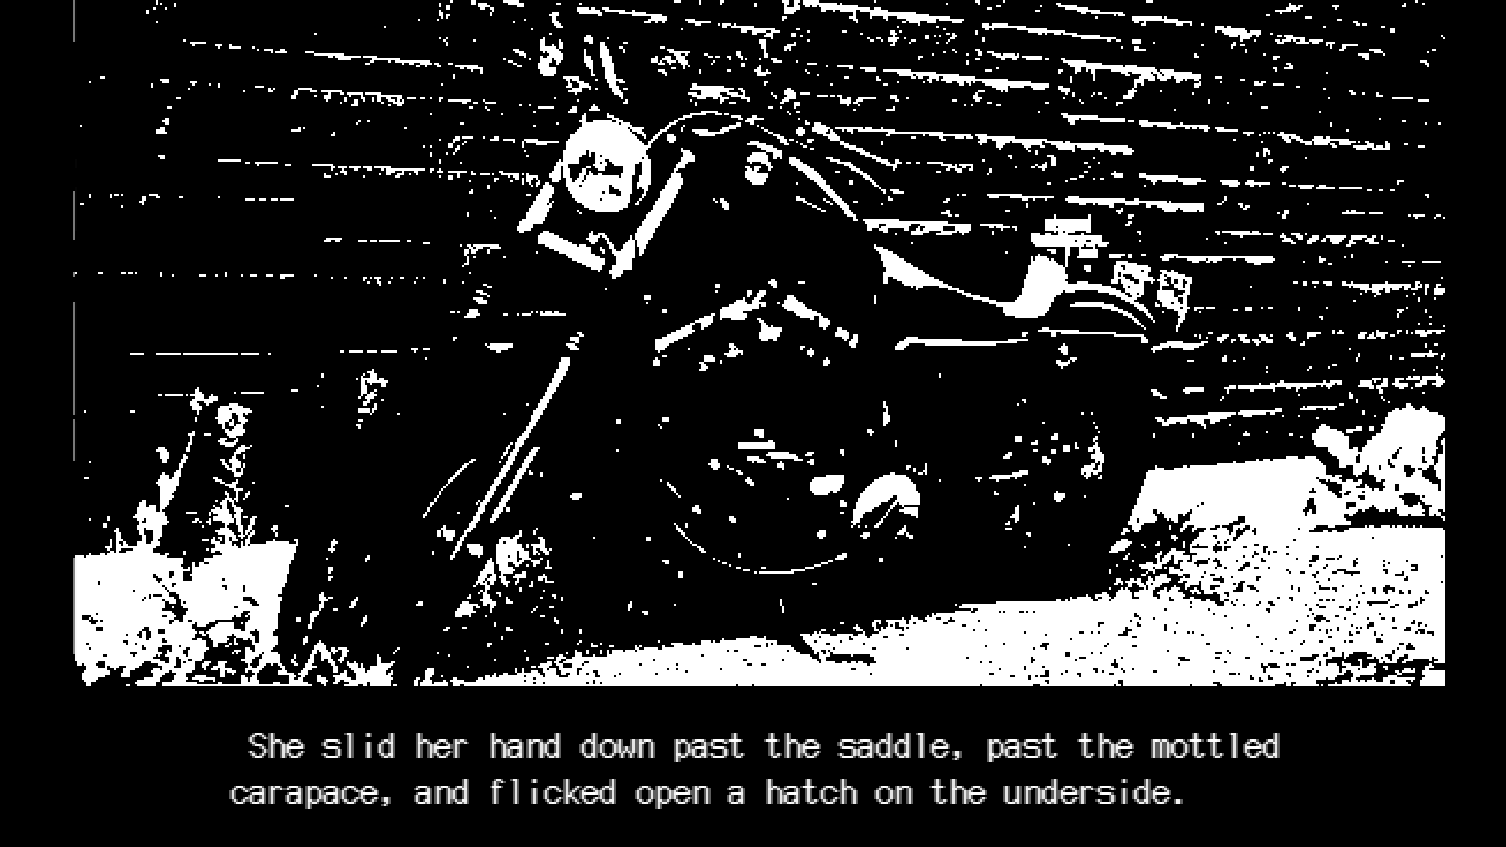 A pixellated black & white picture of a motorbike, with the text underneath: She slid her hand down the saddle, past the mottled carapace, and flicked open a hatch on the underside.